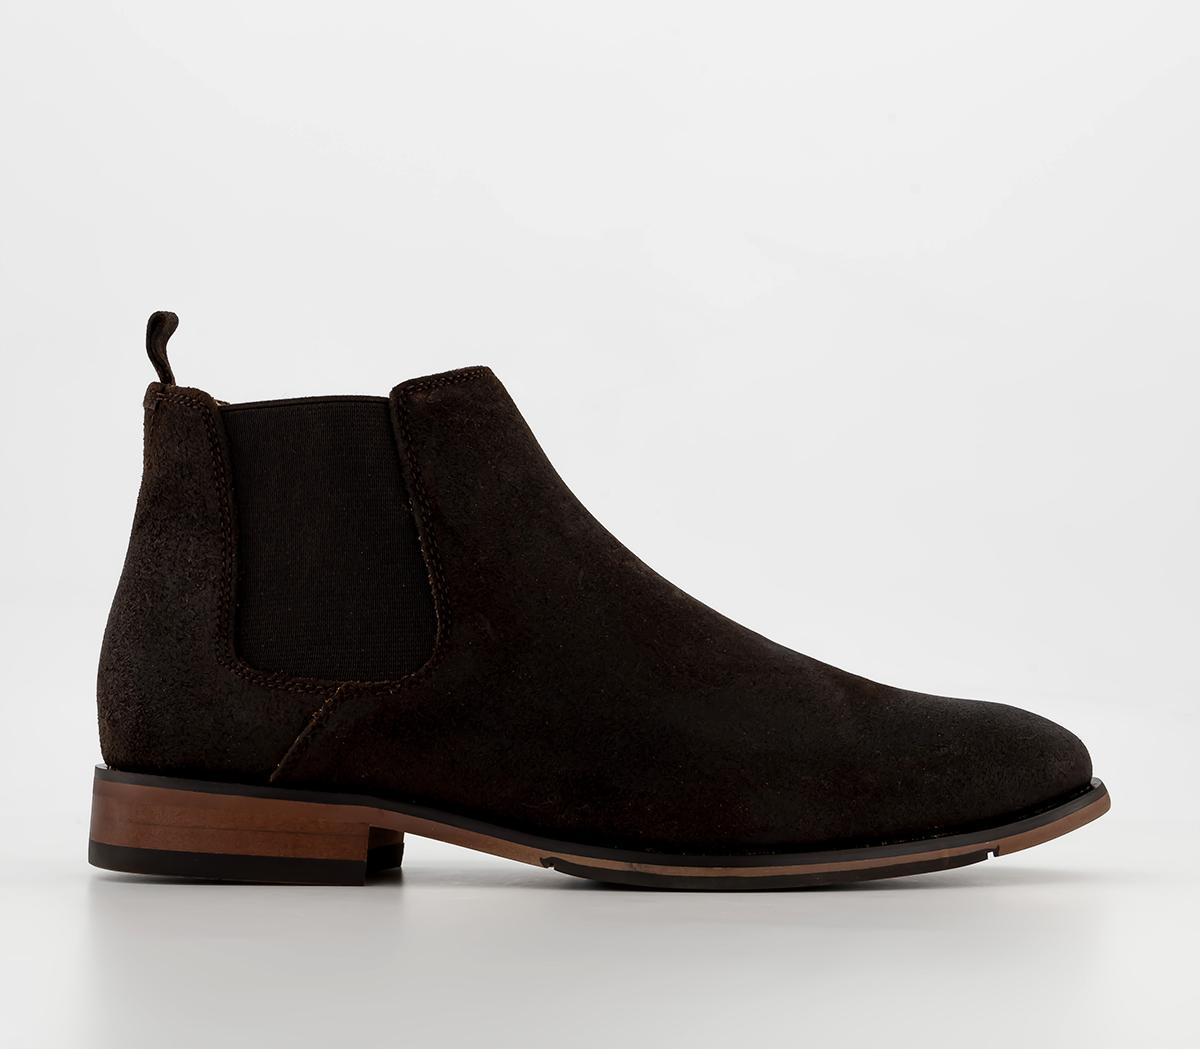 OFFICE Barkley 2 Chelsea Boots Brown Waxed Suede - Men’s Boots